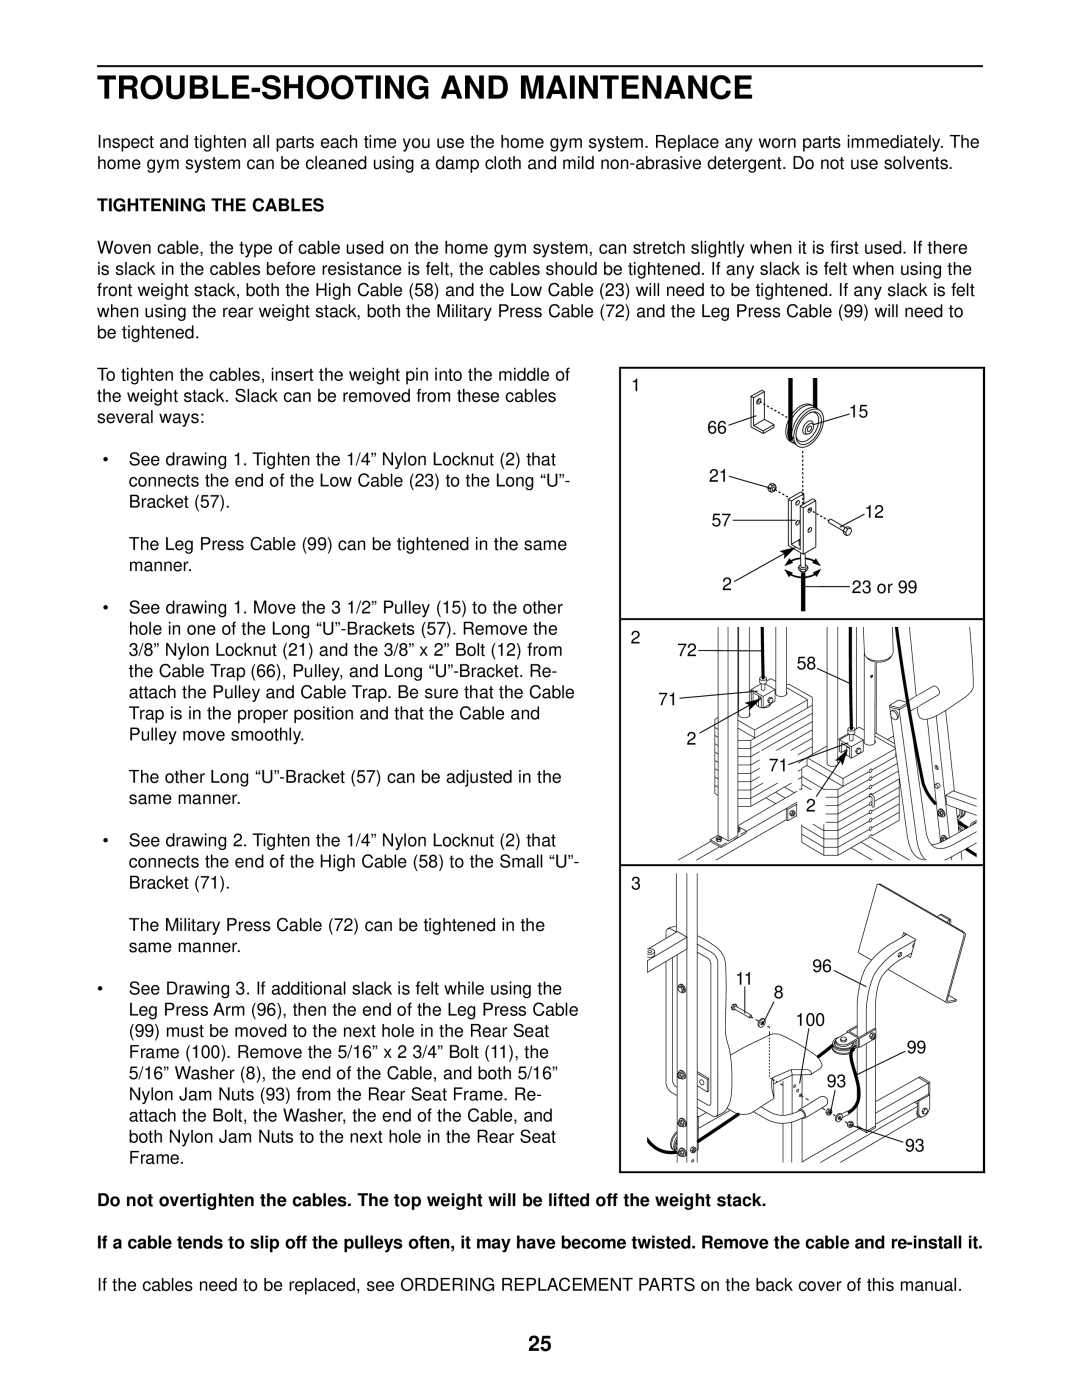 Weider WESY96400 user manual Trouble-Shooting And Maintenance 